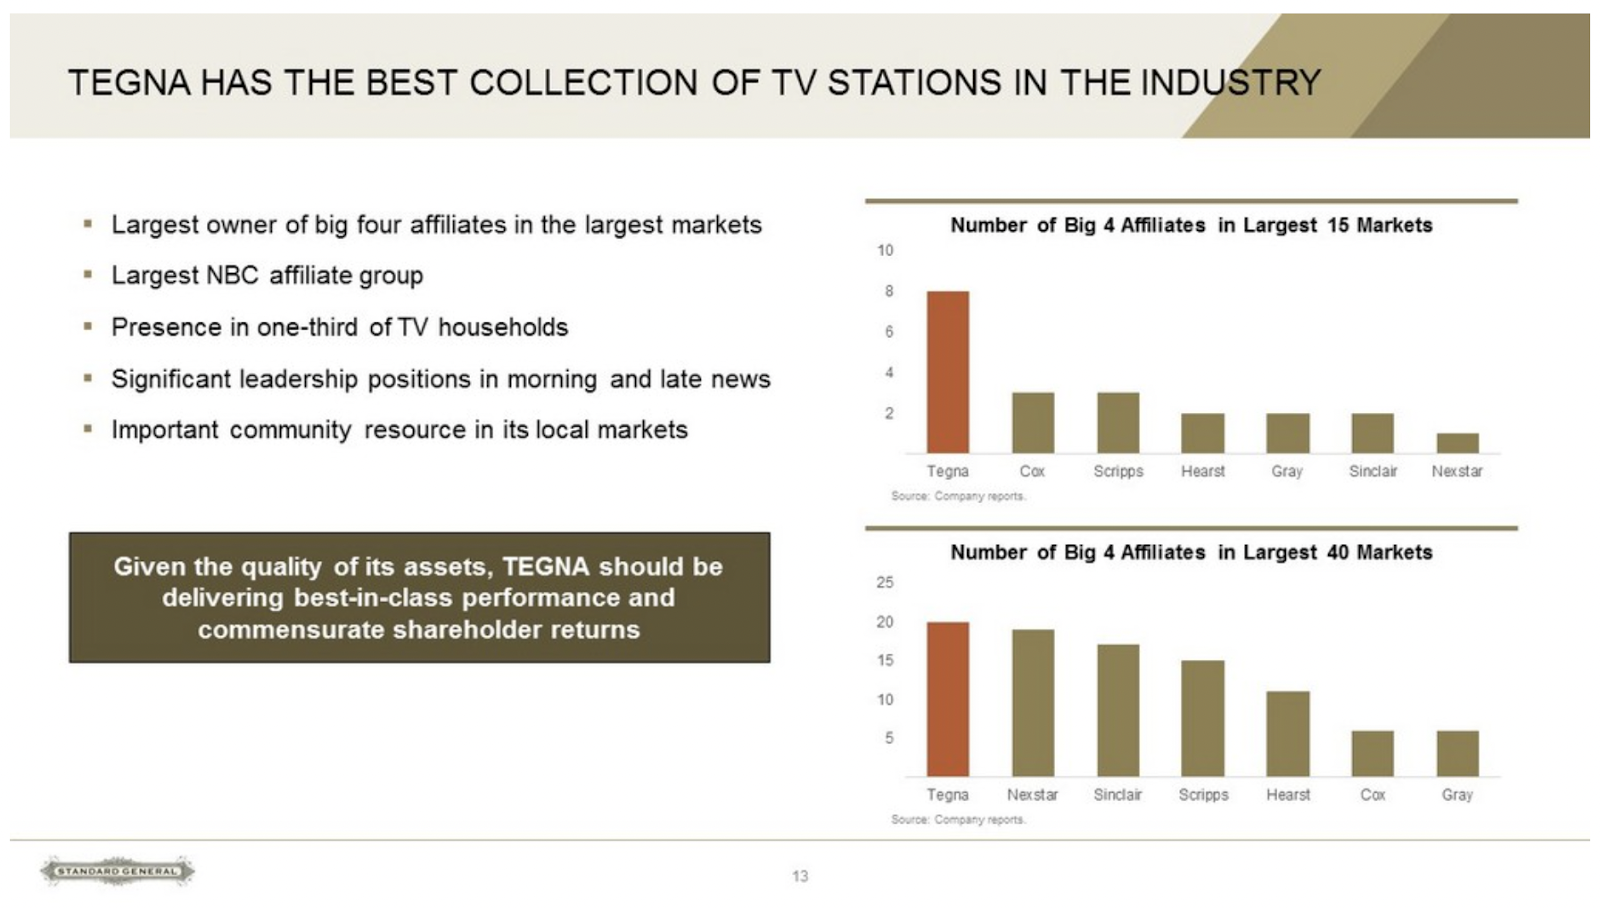 A PowerPoint slide showing that TEGNA has "the best collection of TV stations in the industry."